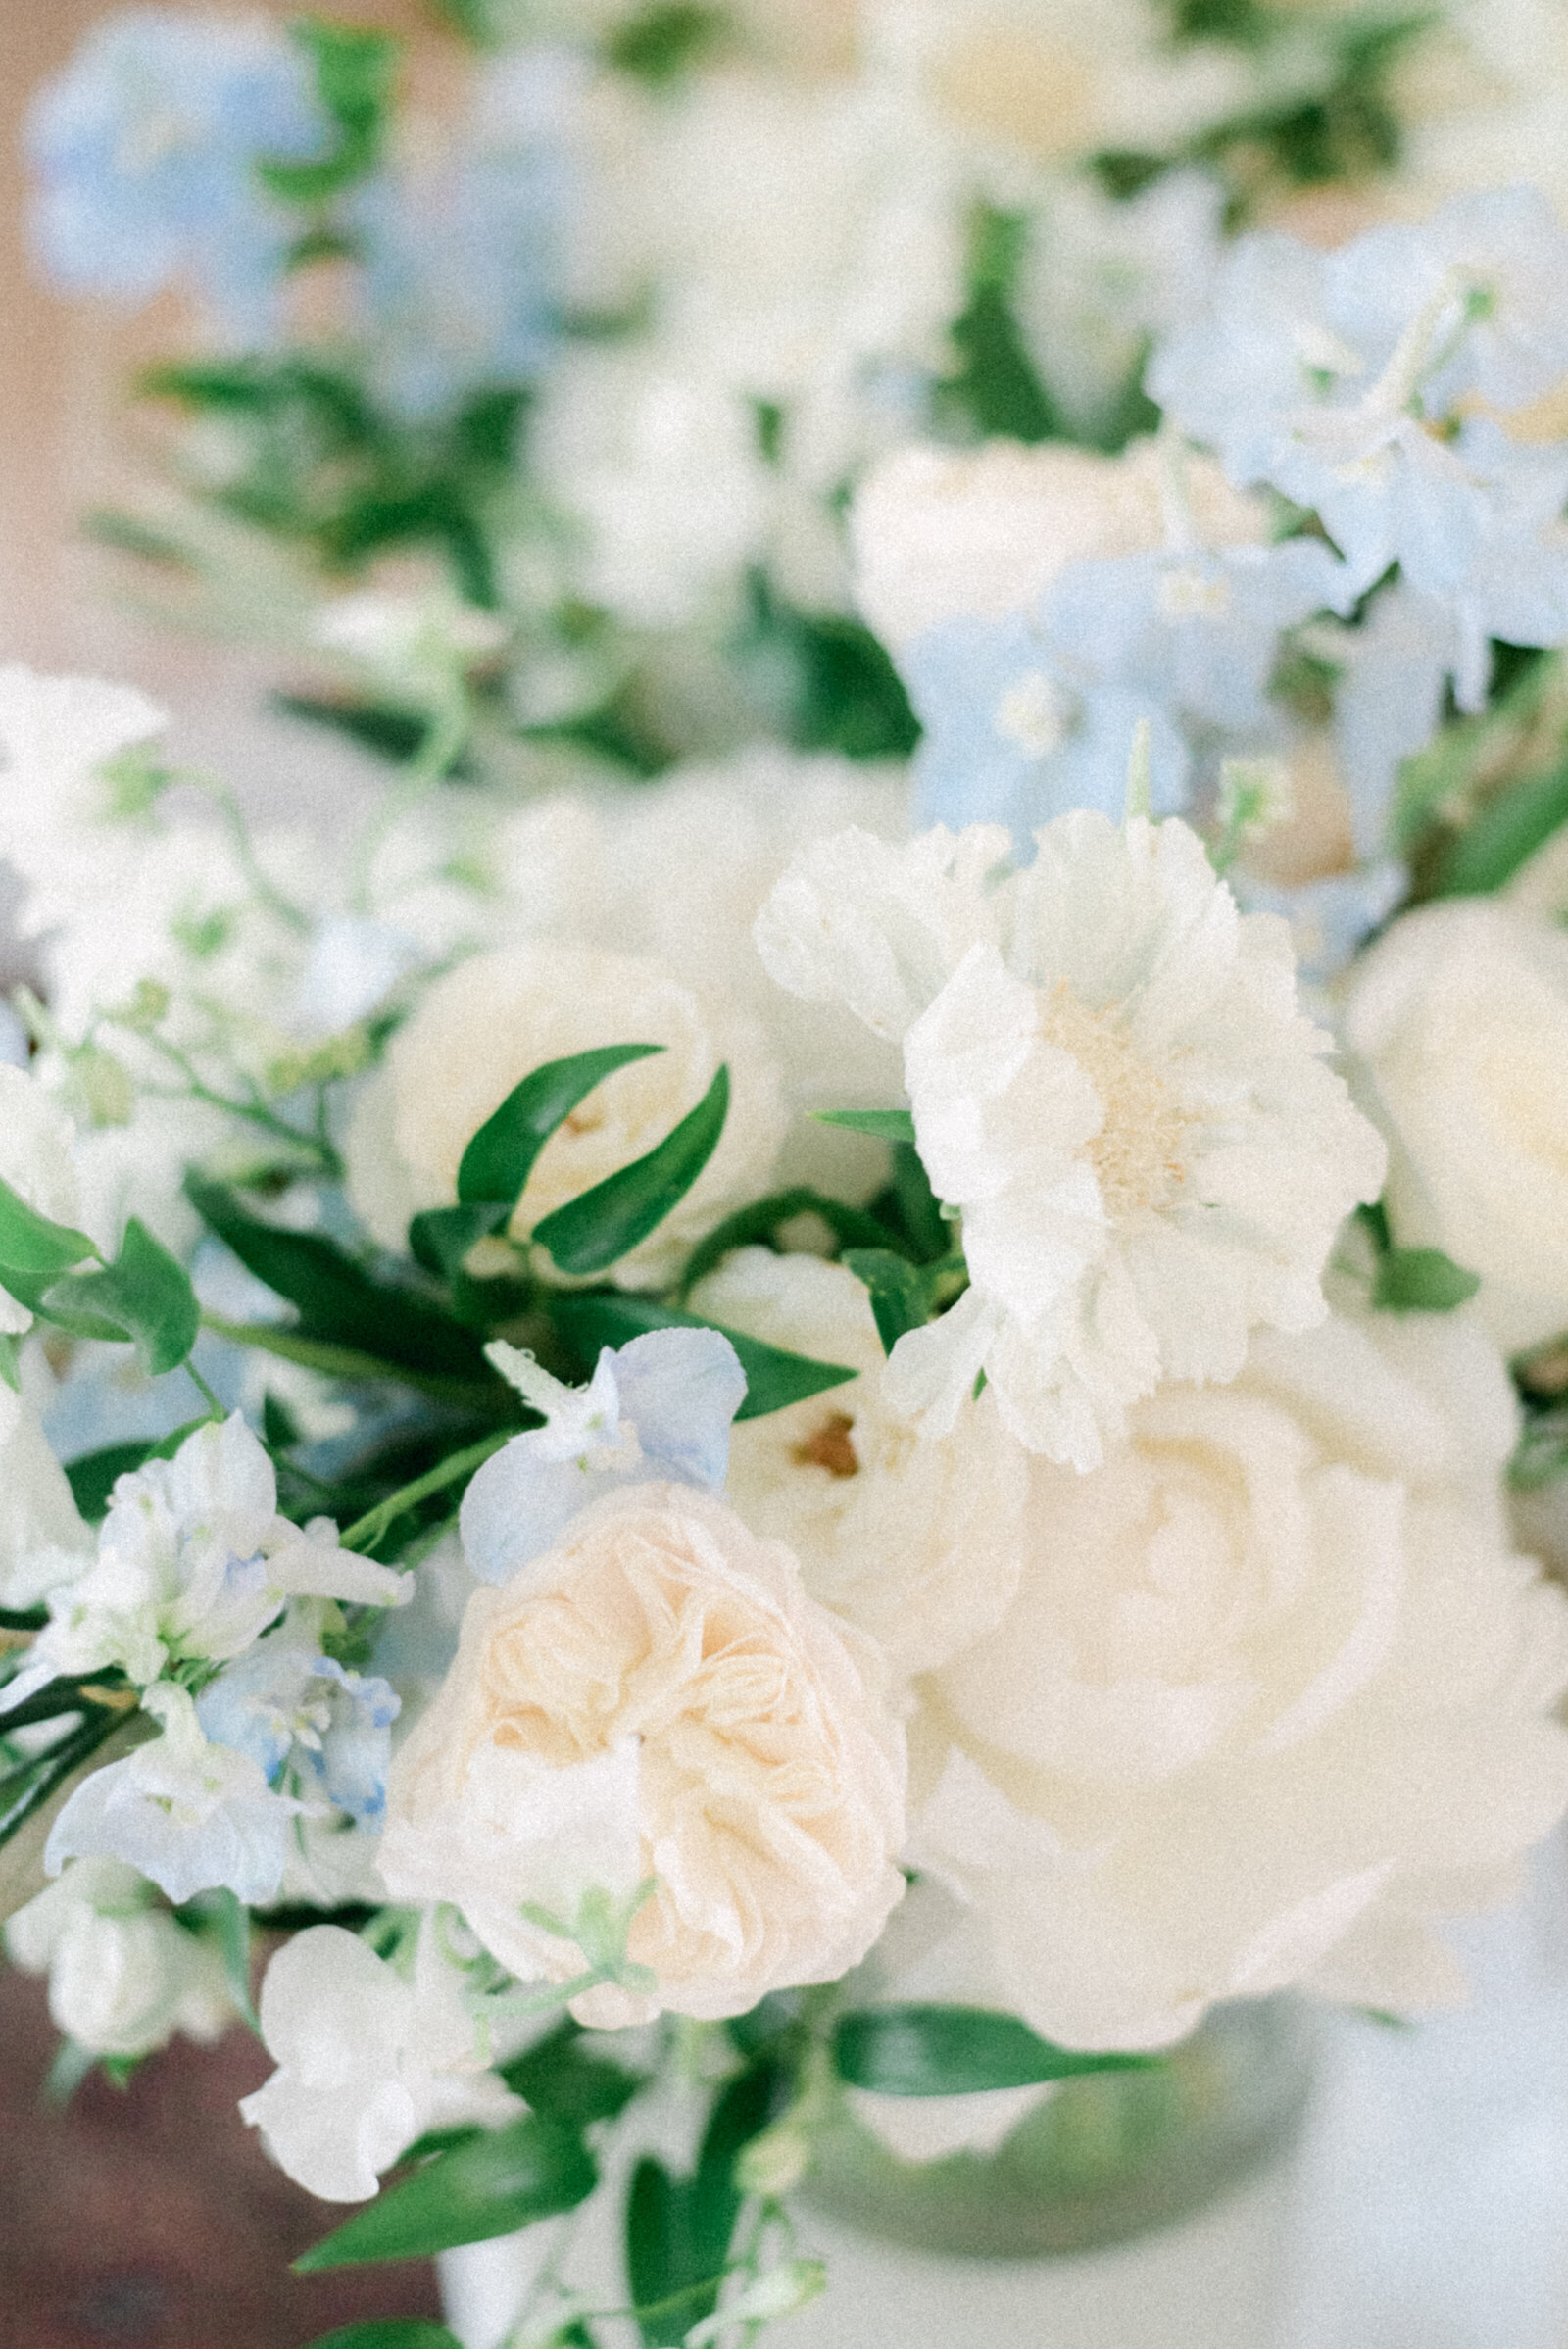 Wedding flowers in an image photographed by wedding photographer Hannika Gabrielsson.